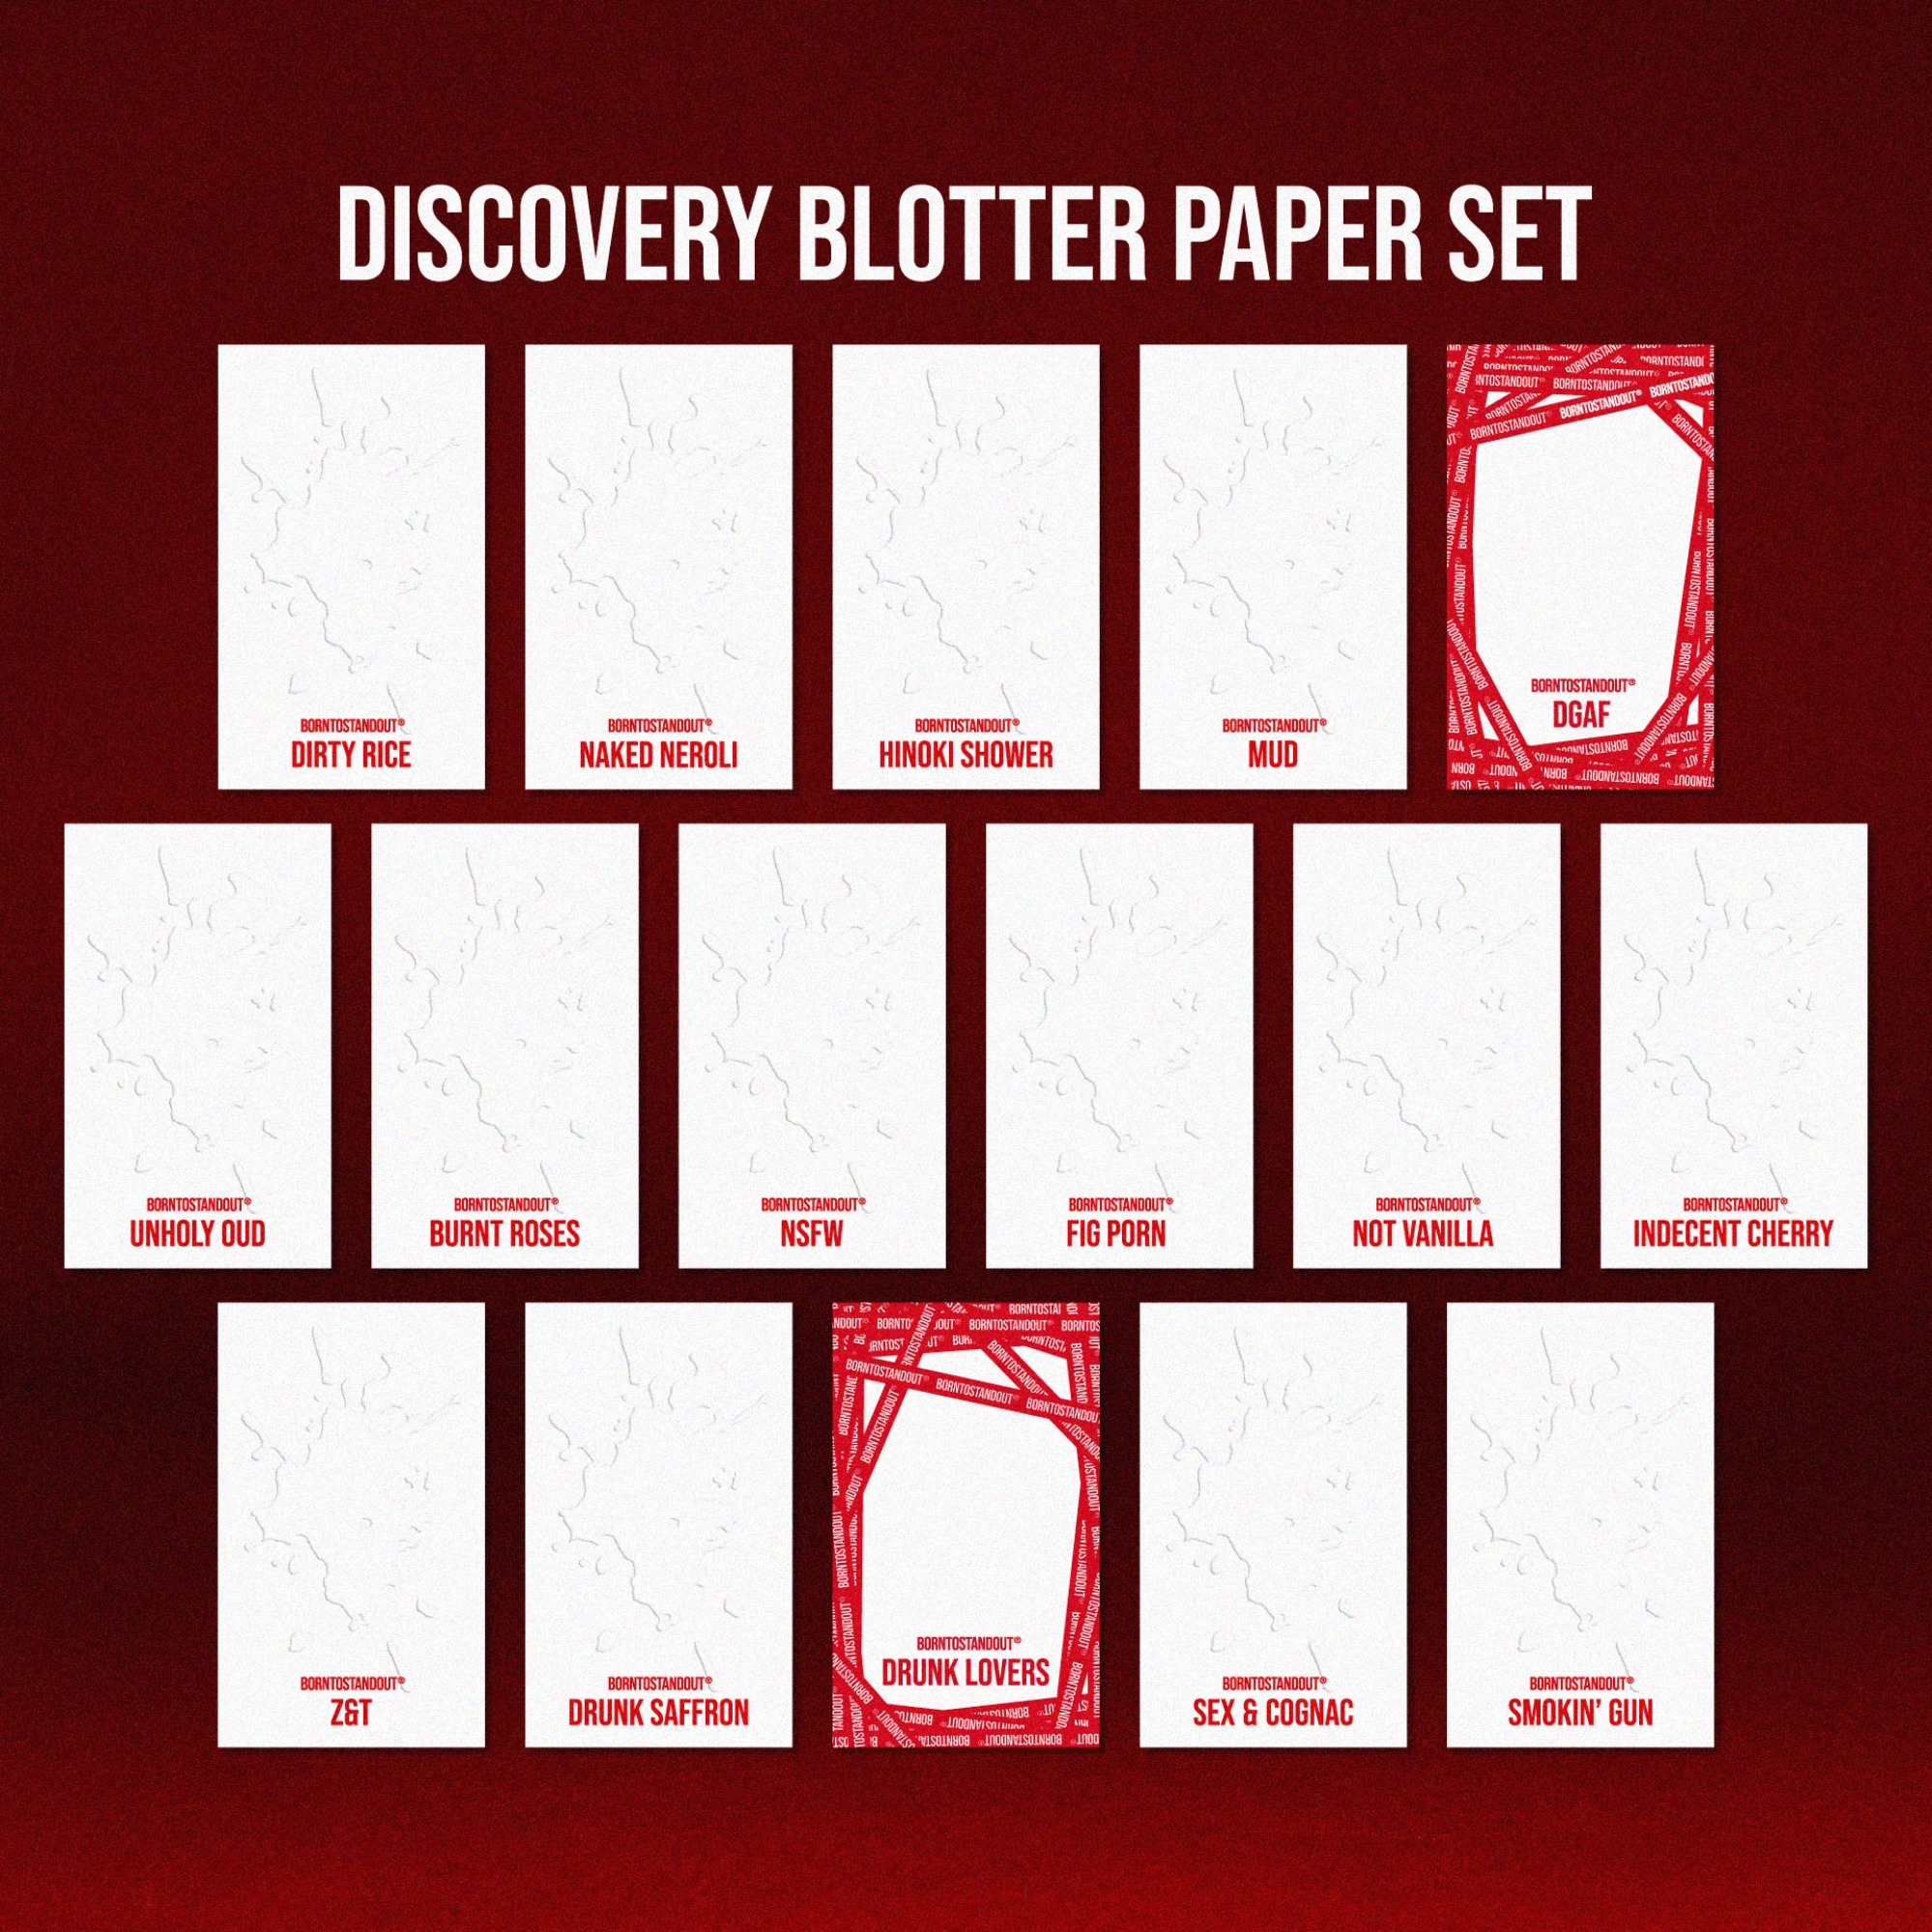 DISCOVERY BLOTTER PAPER